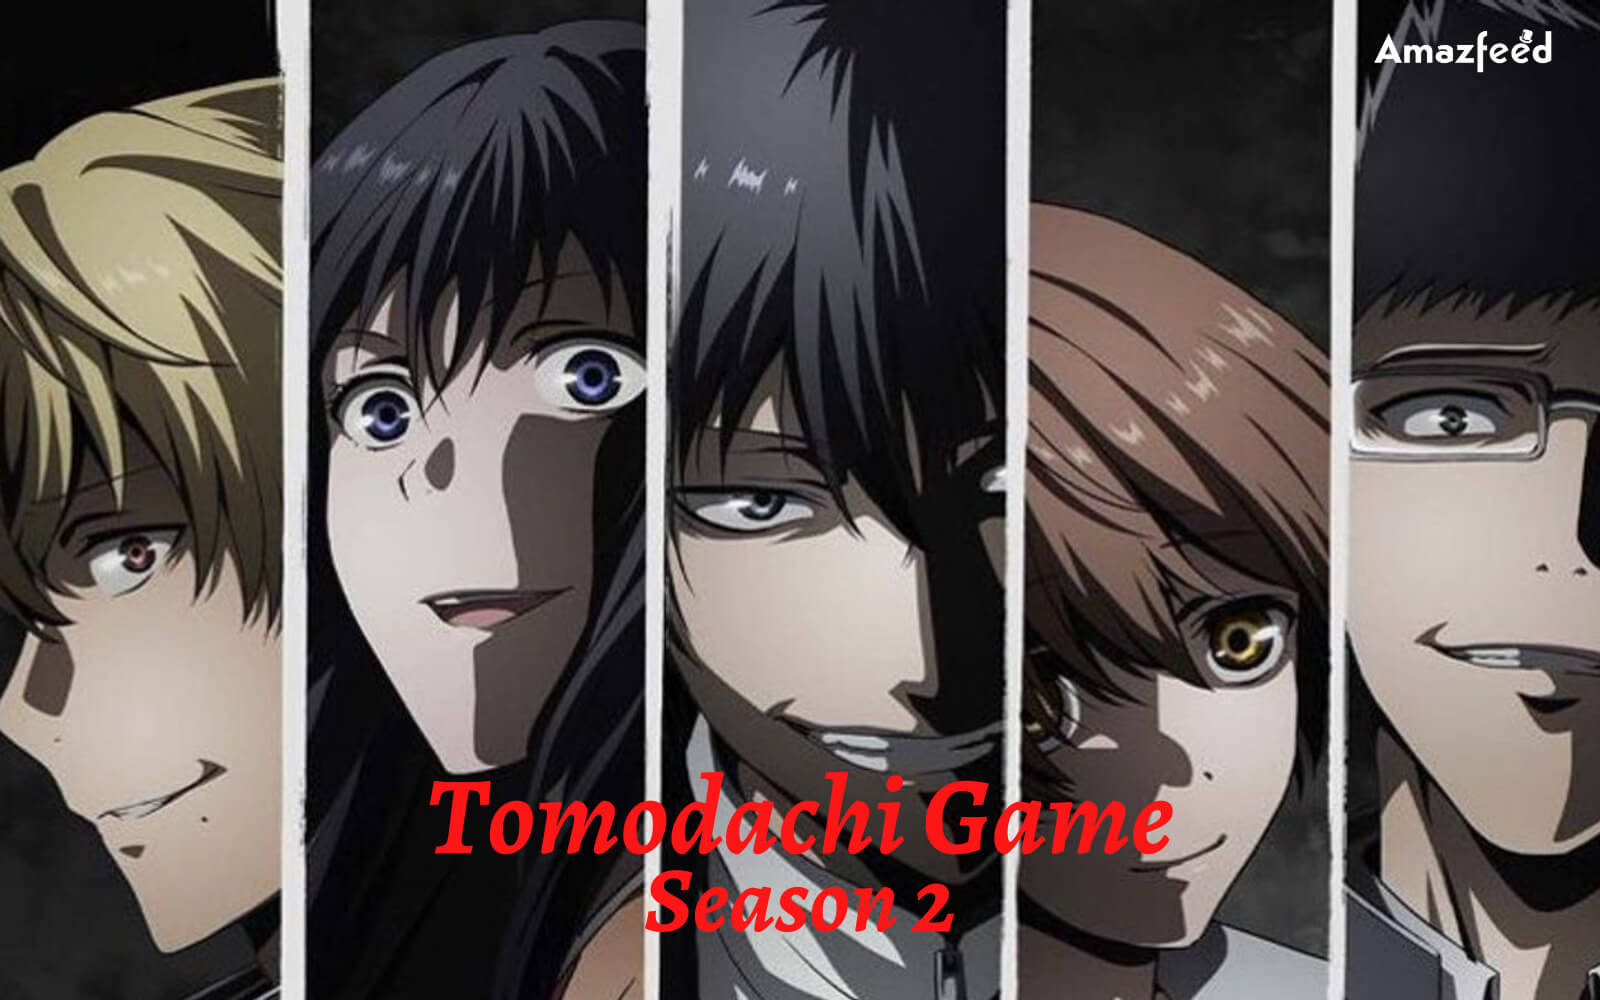 Tomodachi Game season 2: Anime has plenty of source material available